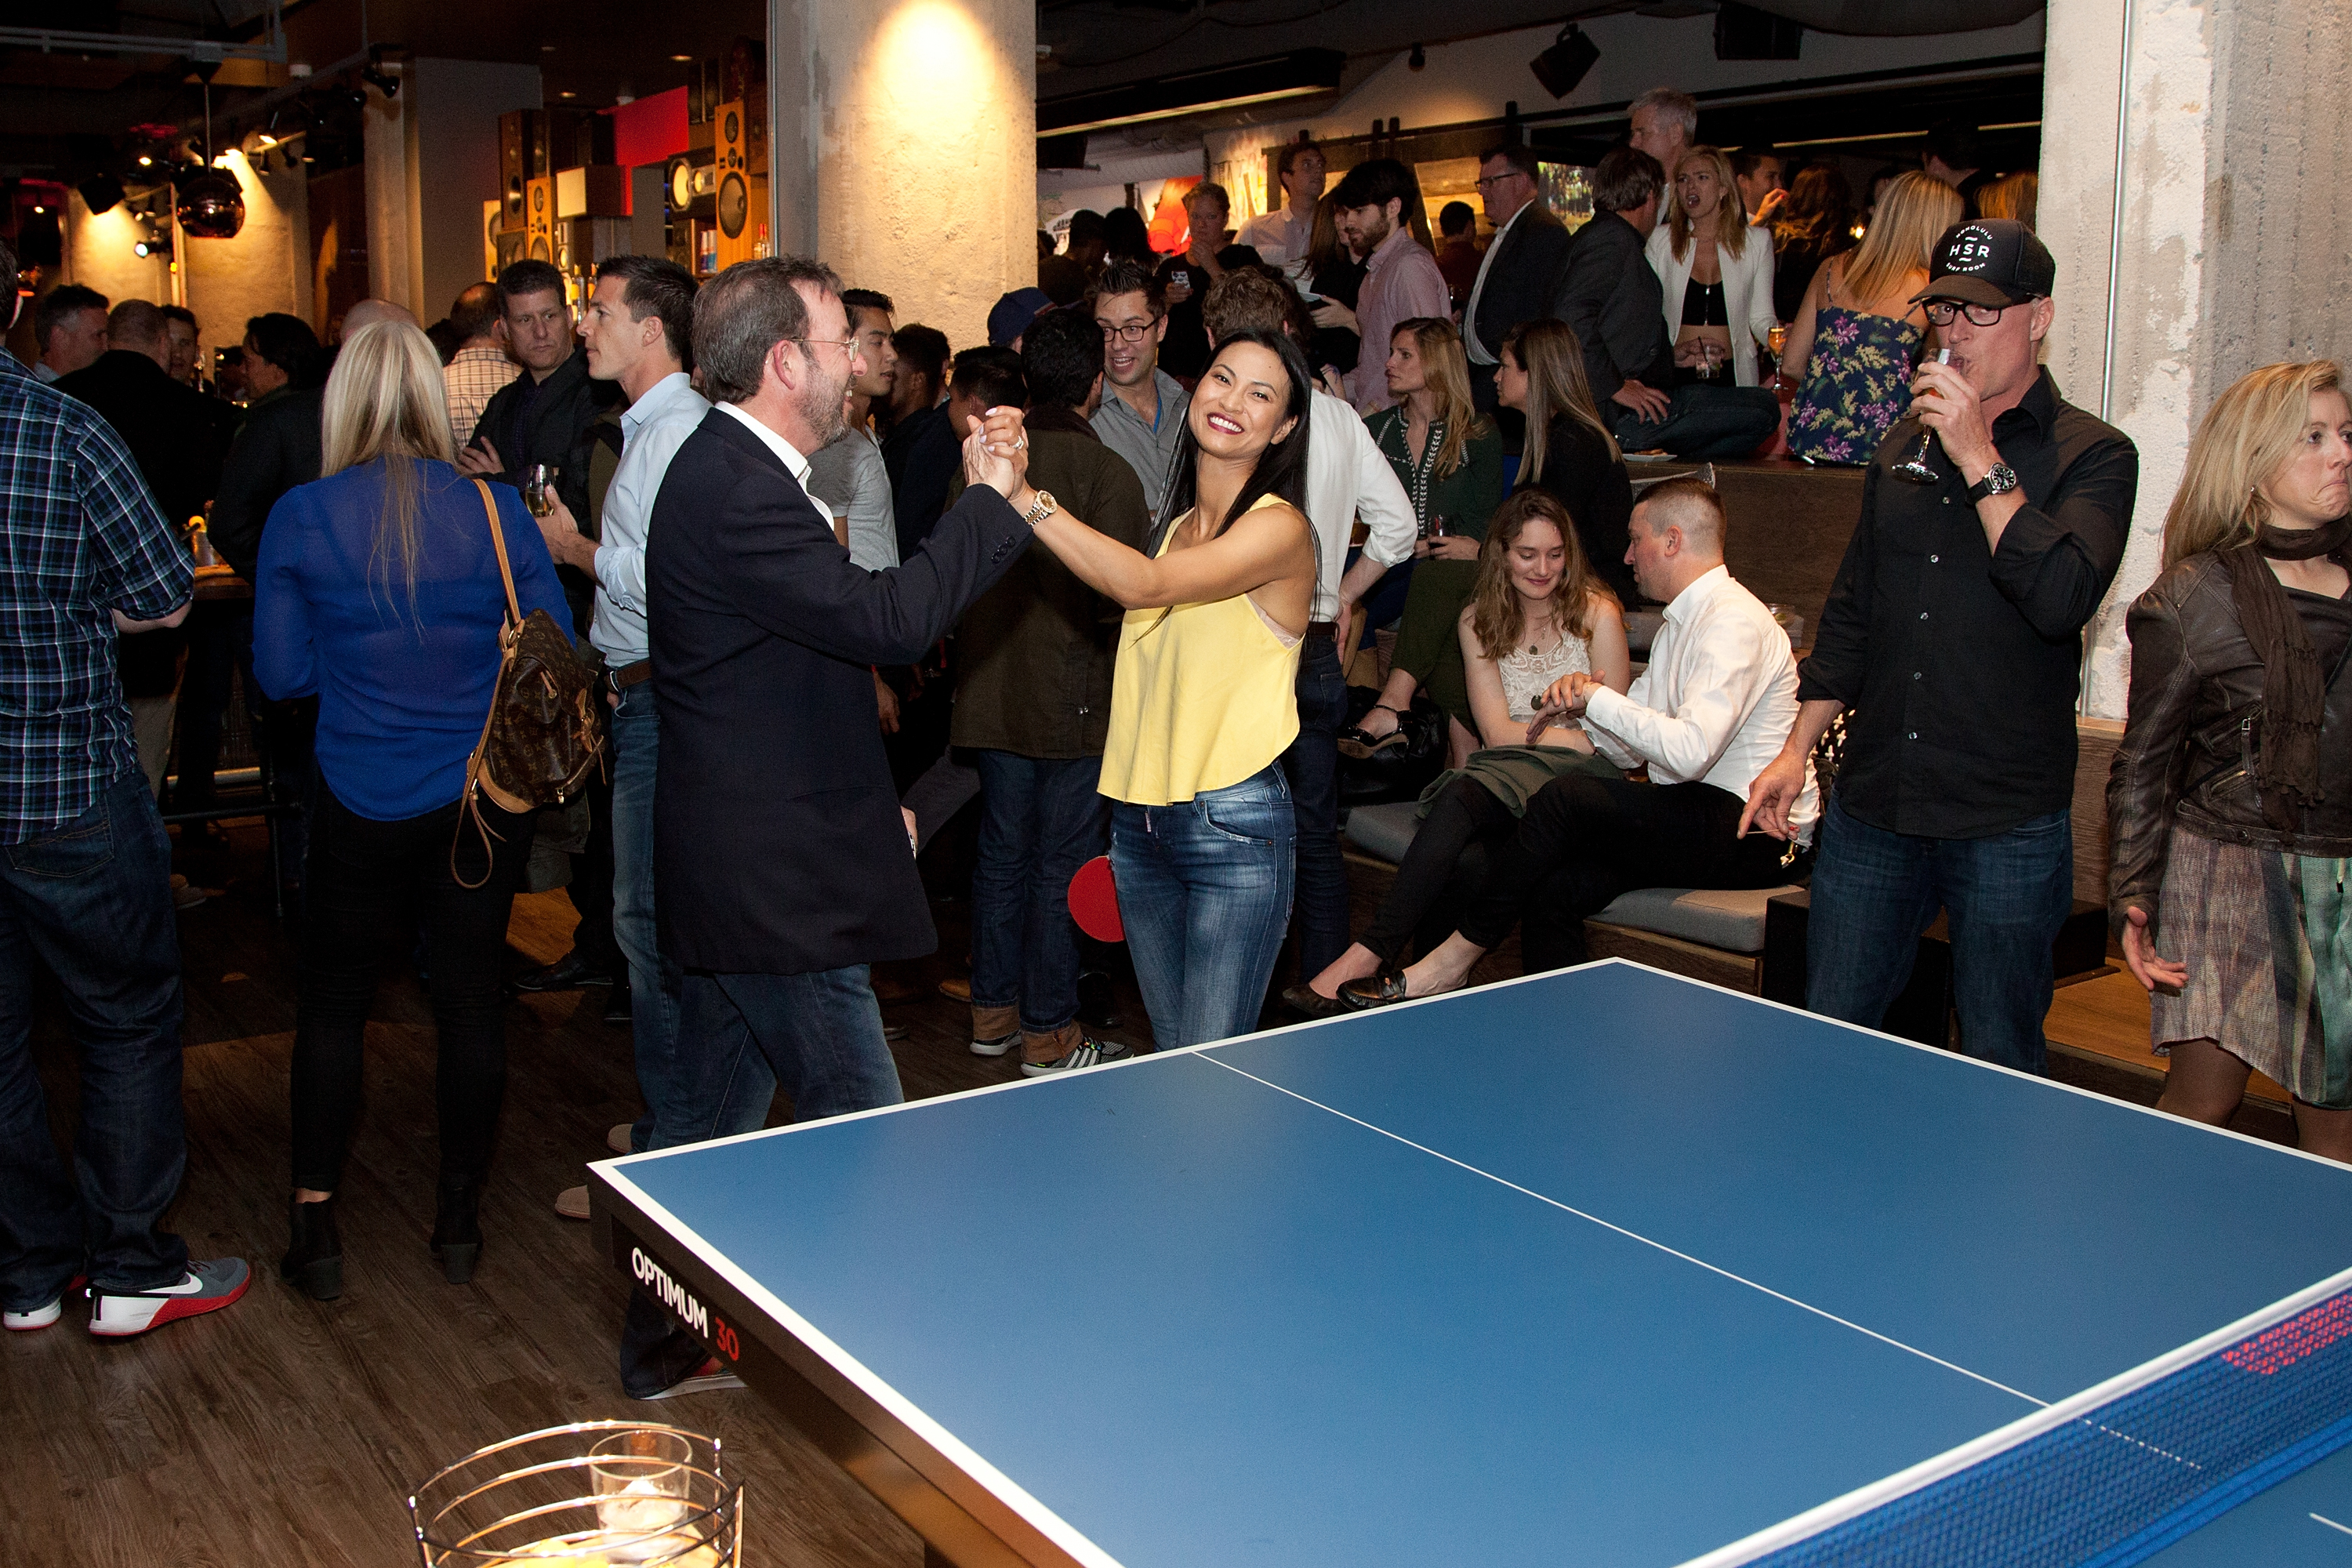 This Pingpong Bar Makes for a Playful Date in San Francisco